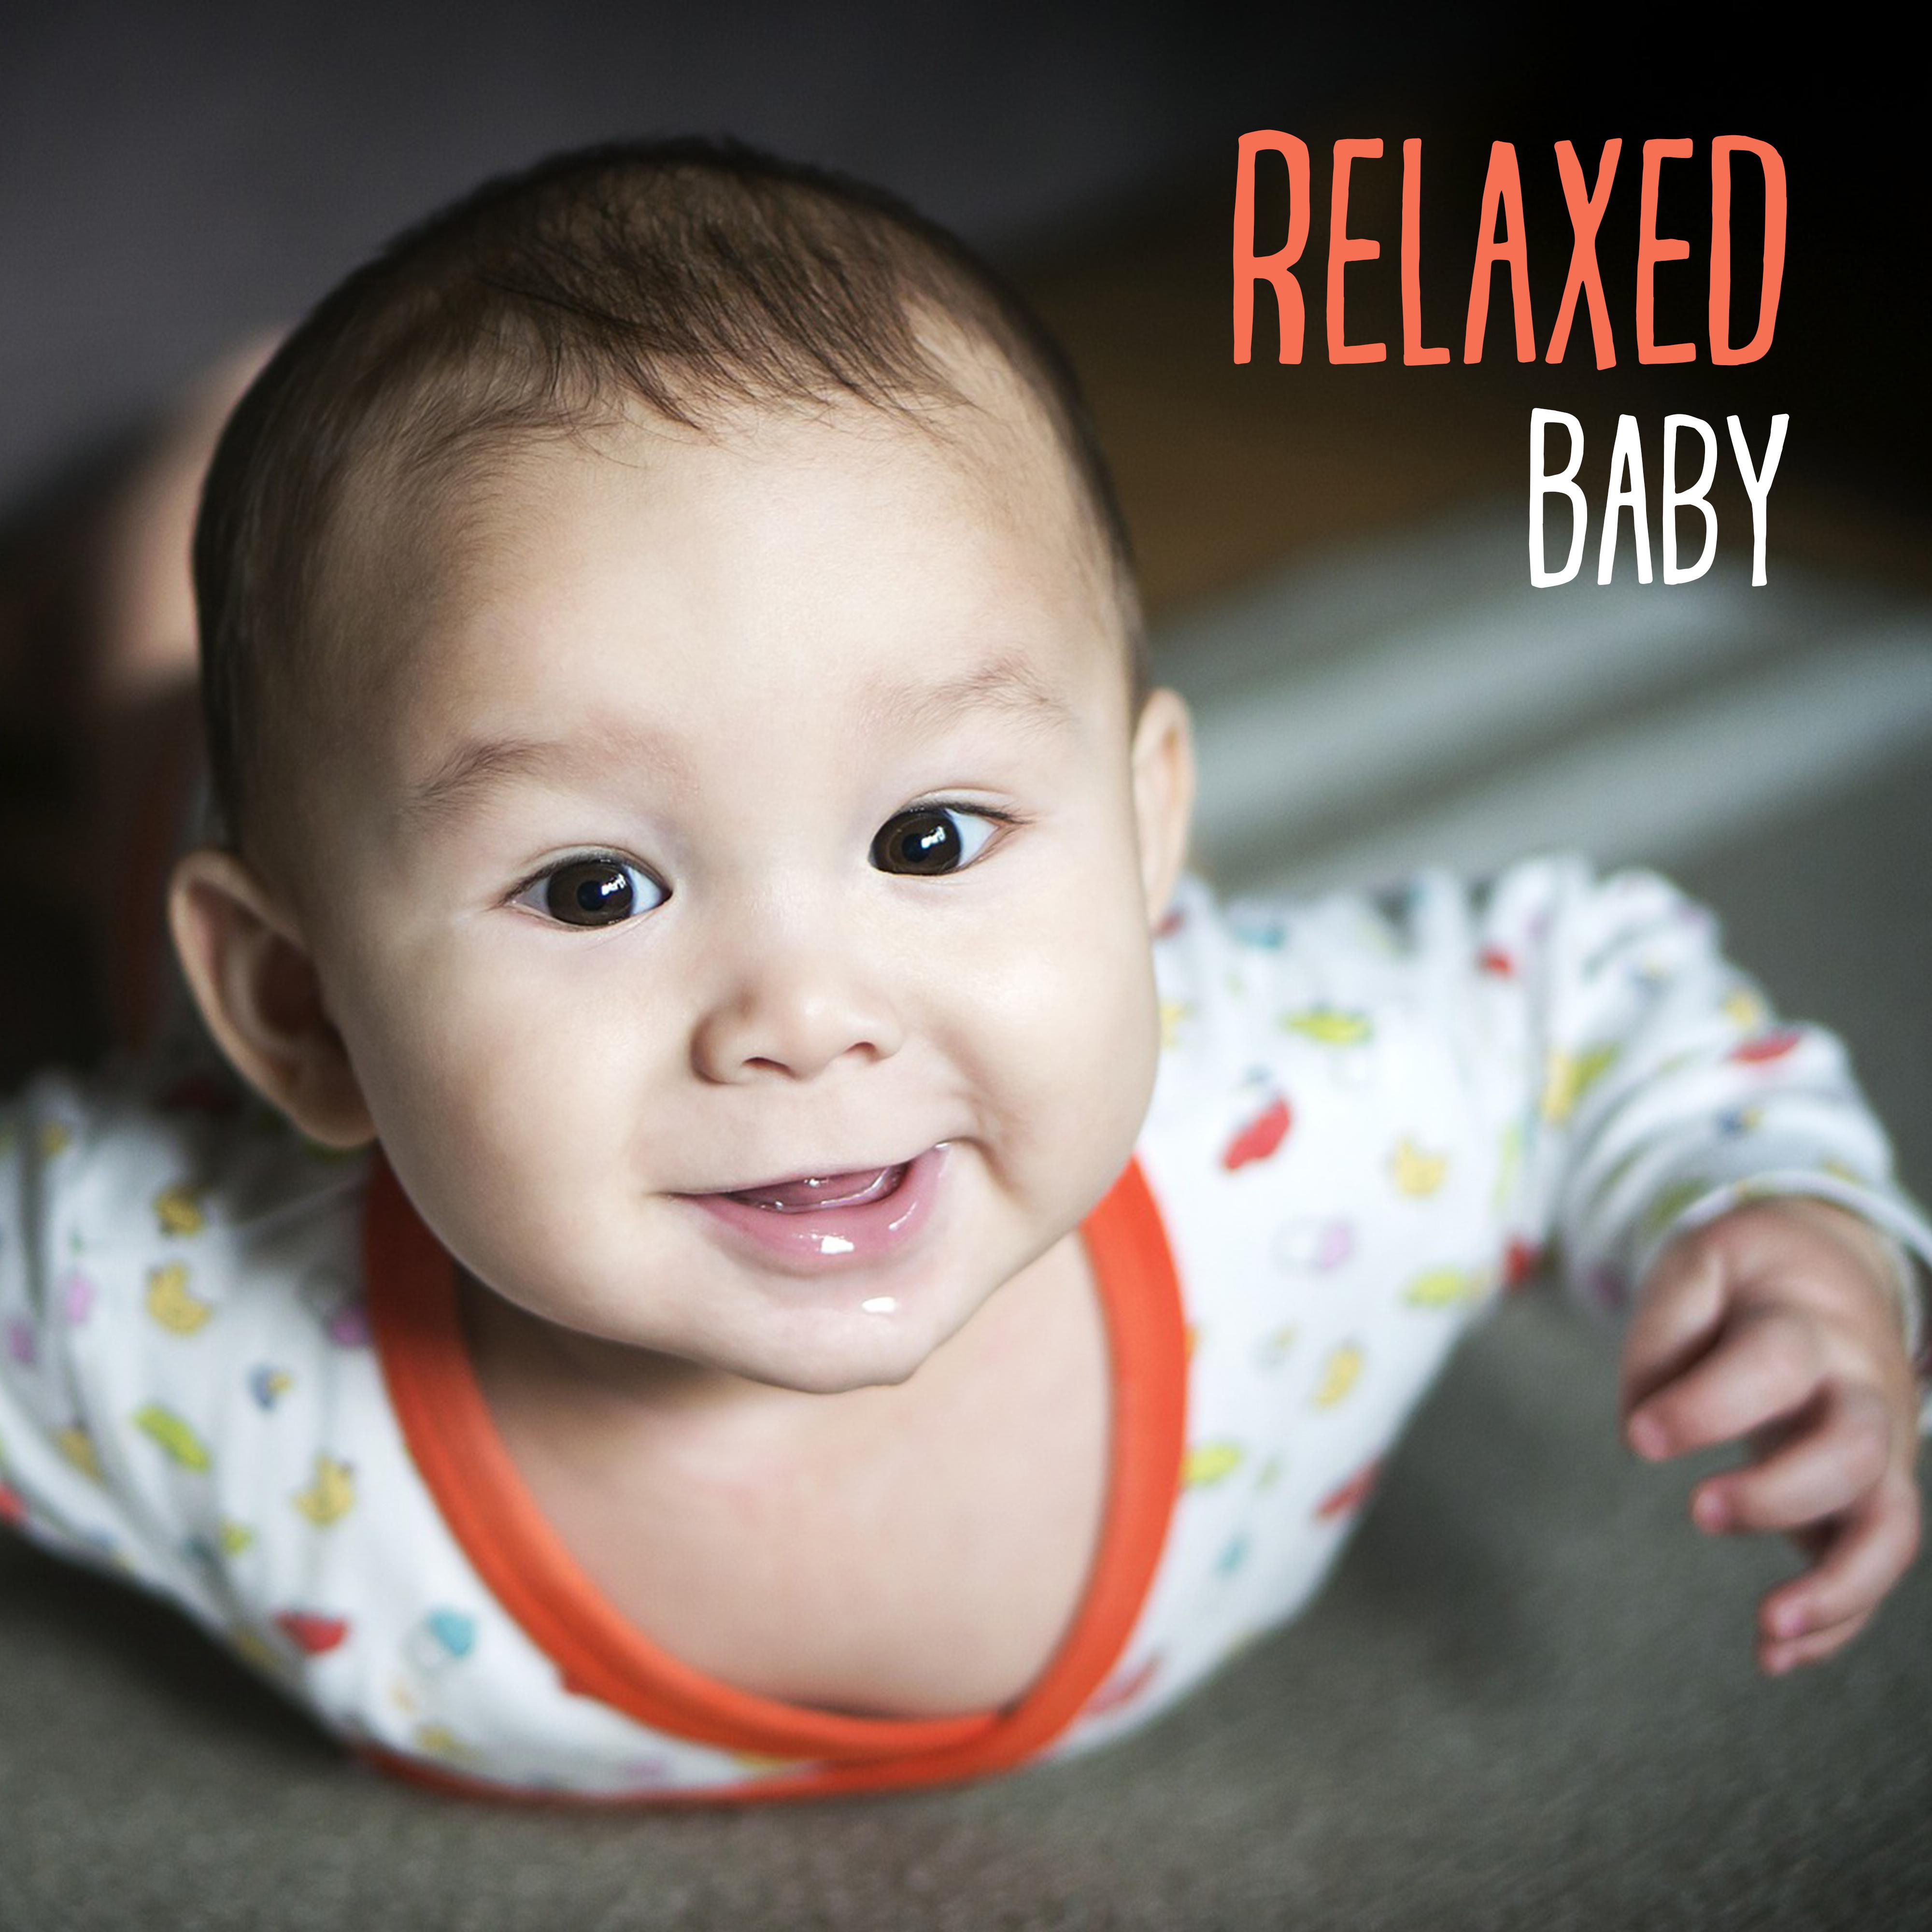 Relaxed Baby  Classical Music for Baby to Sleep, Lullabies for Sleep, Relaxing Music for Baby, Calming Melodies